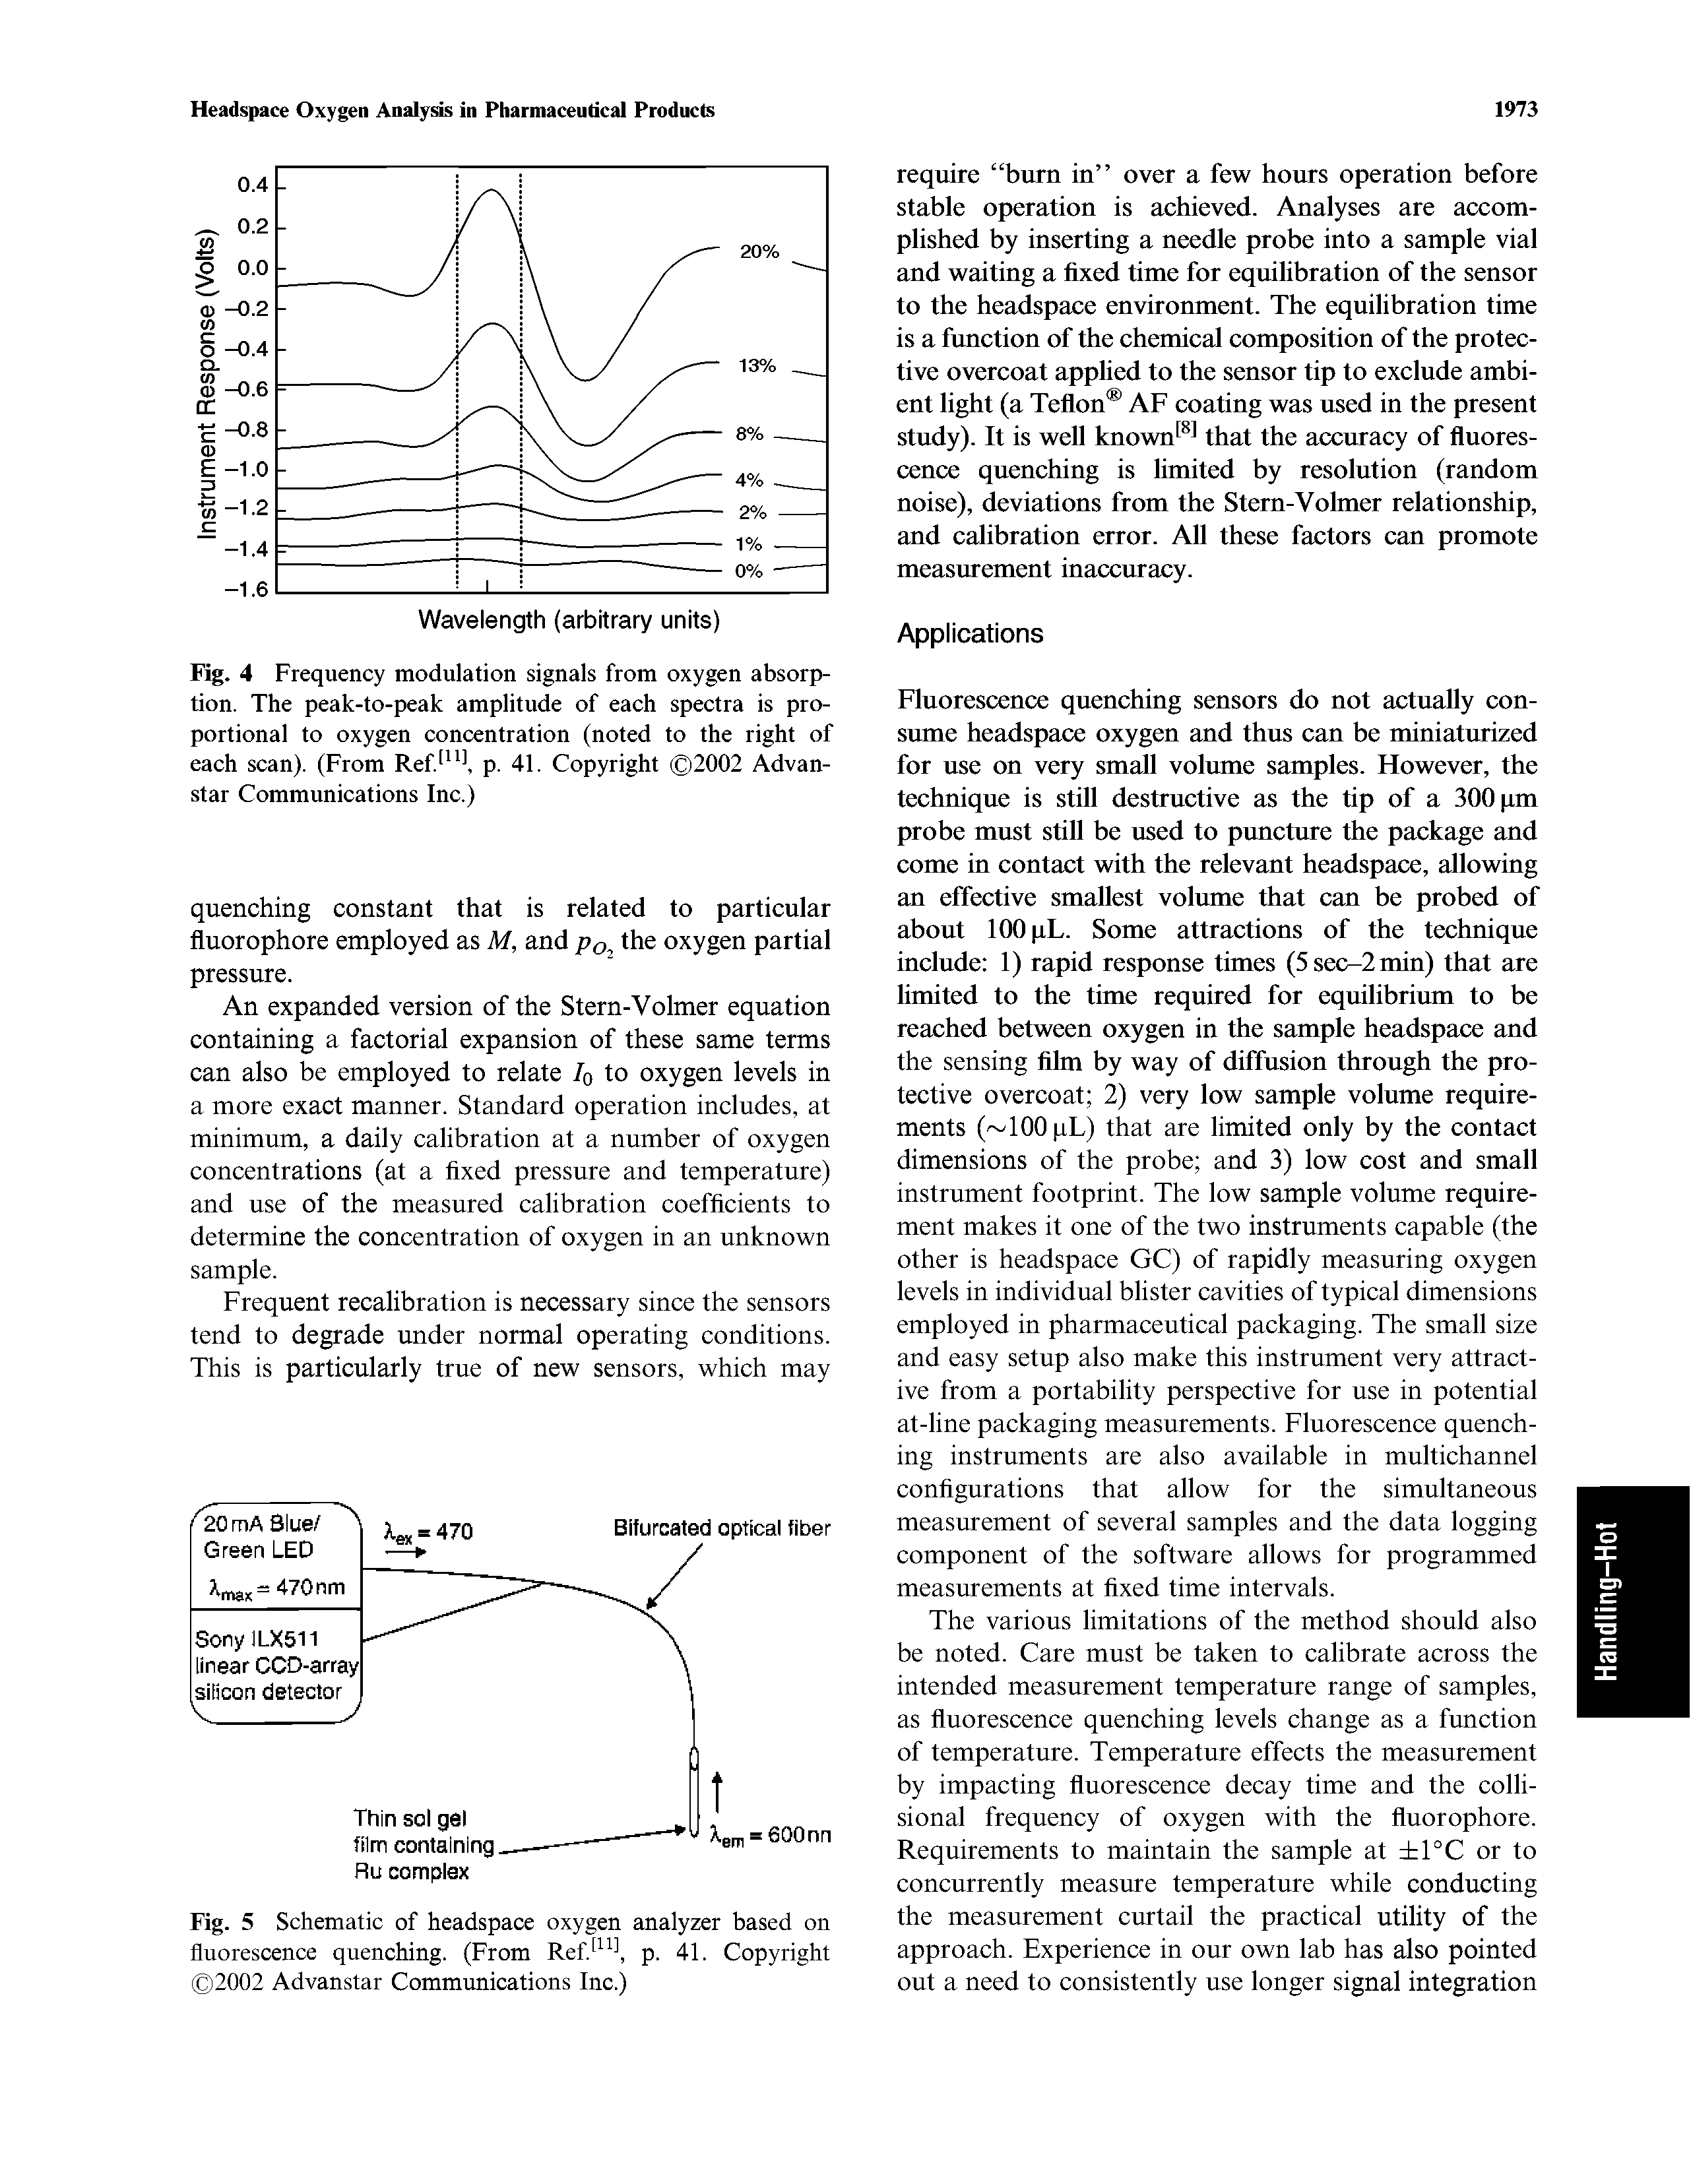 Fig. 4 Frequency modulation signals from oxygen absorption. The peak-to-peak amplitude of each spectra is proportional to oxygen concentration (noted to the right of each scan). (From Ref ", p. 41. Copyright 2002 Advan-star Communications Inc.)...